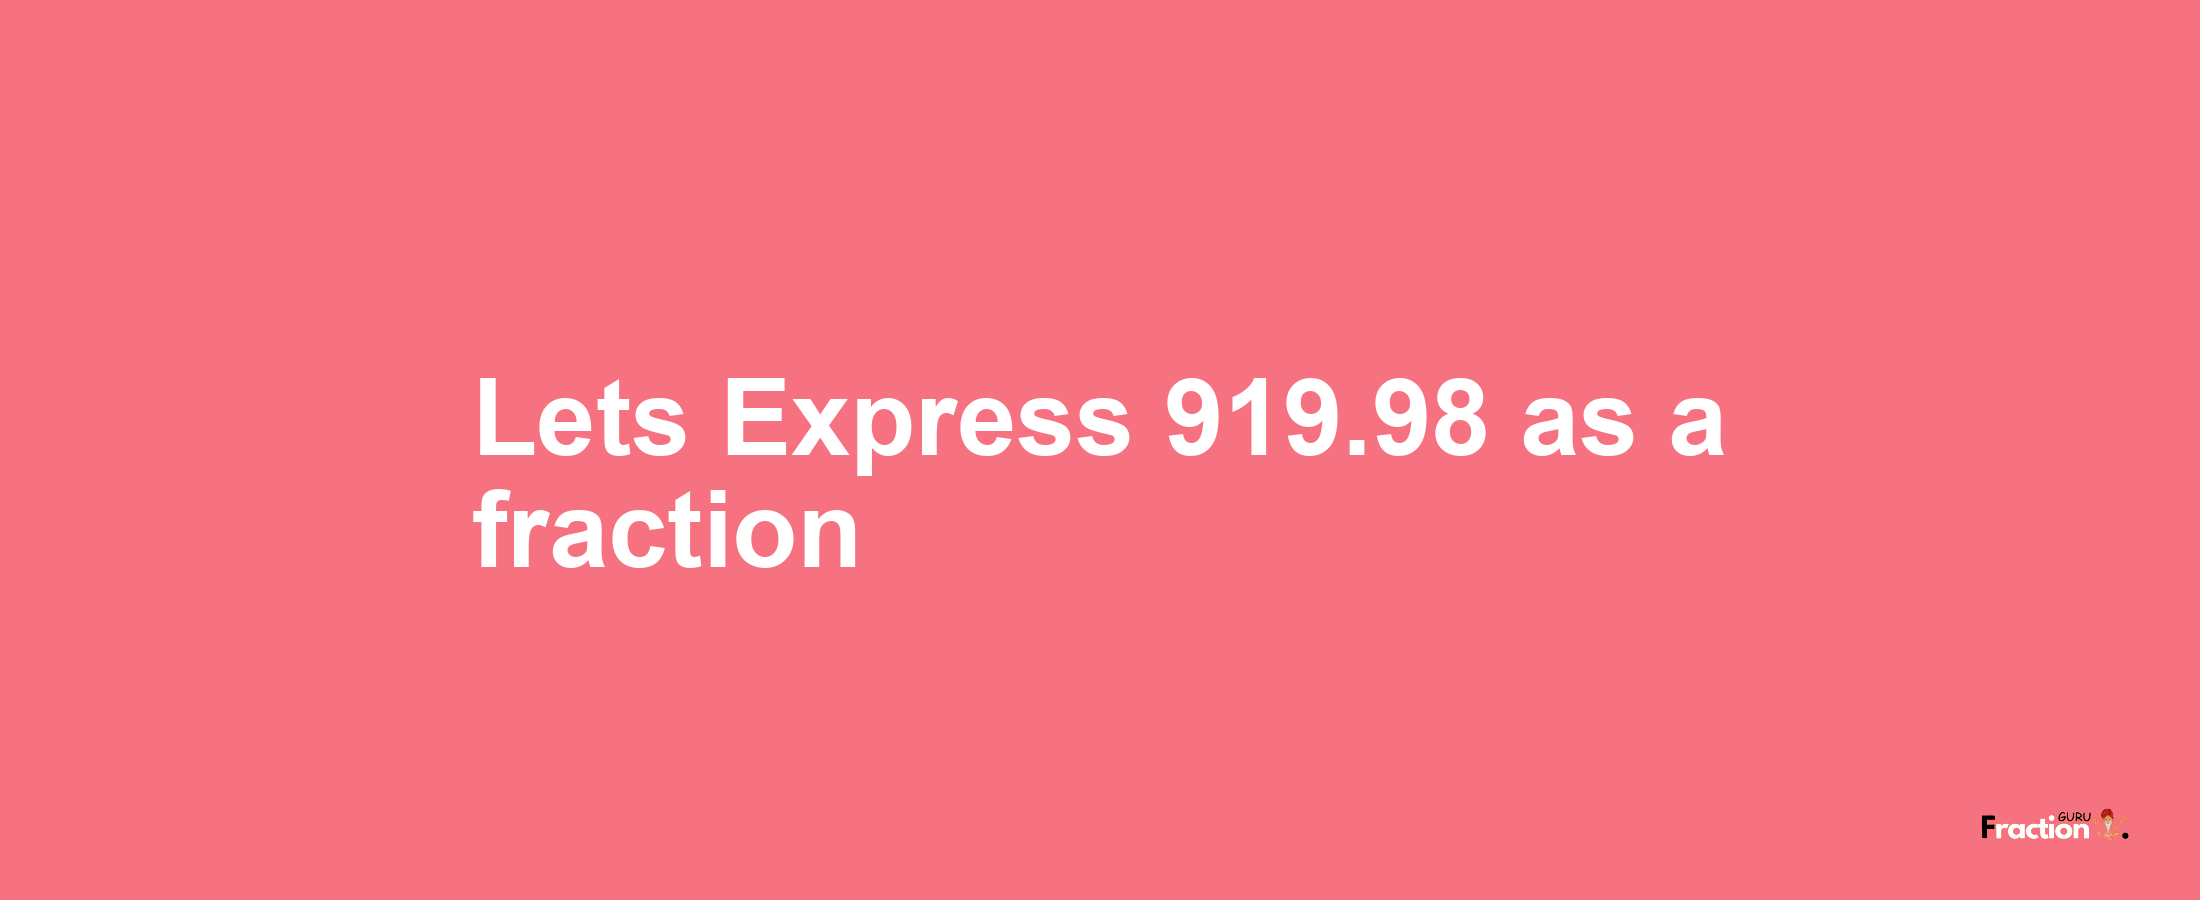 Lets Express 919.98 as afraction